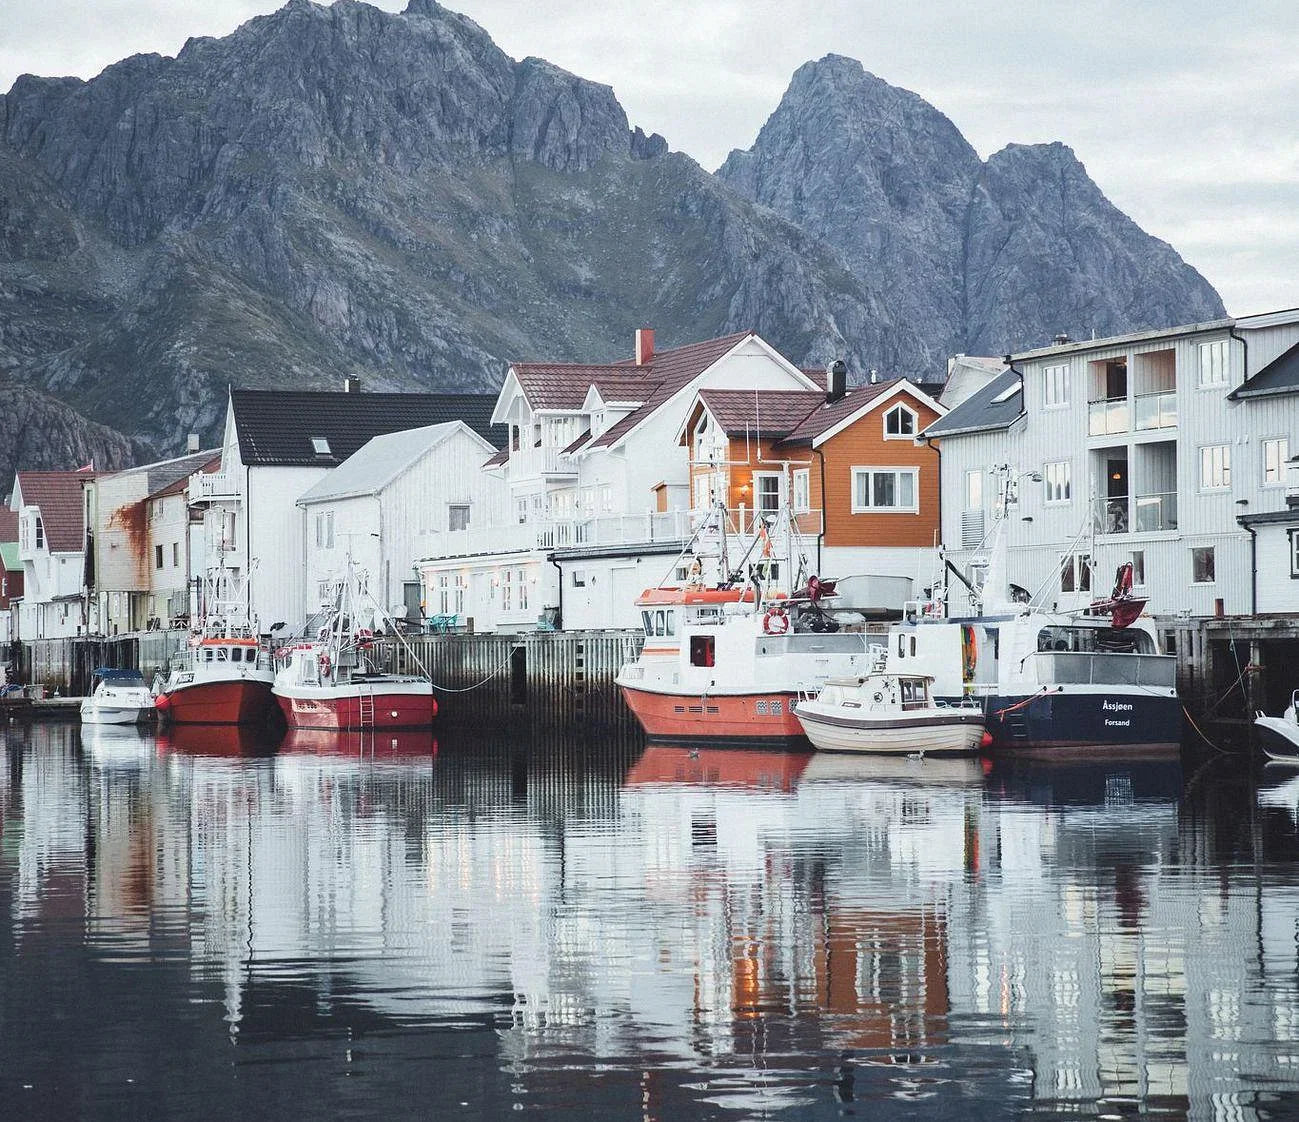 Houses above the water in Henningsvaer Norway with boats parked near them.